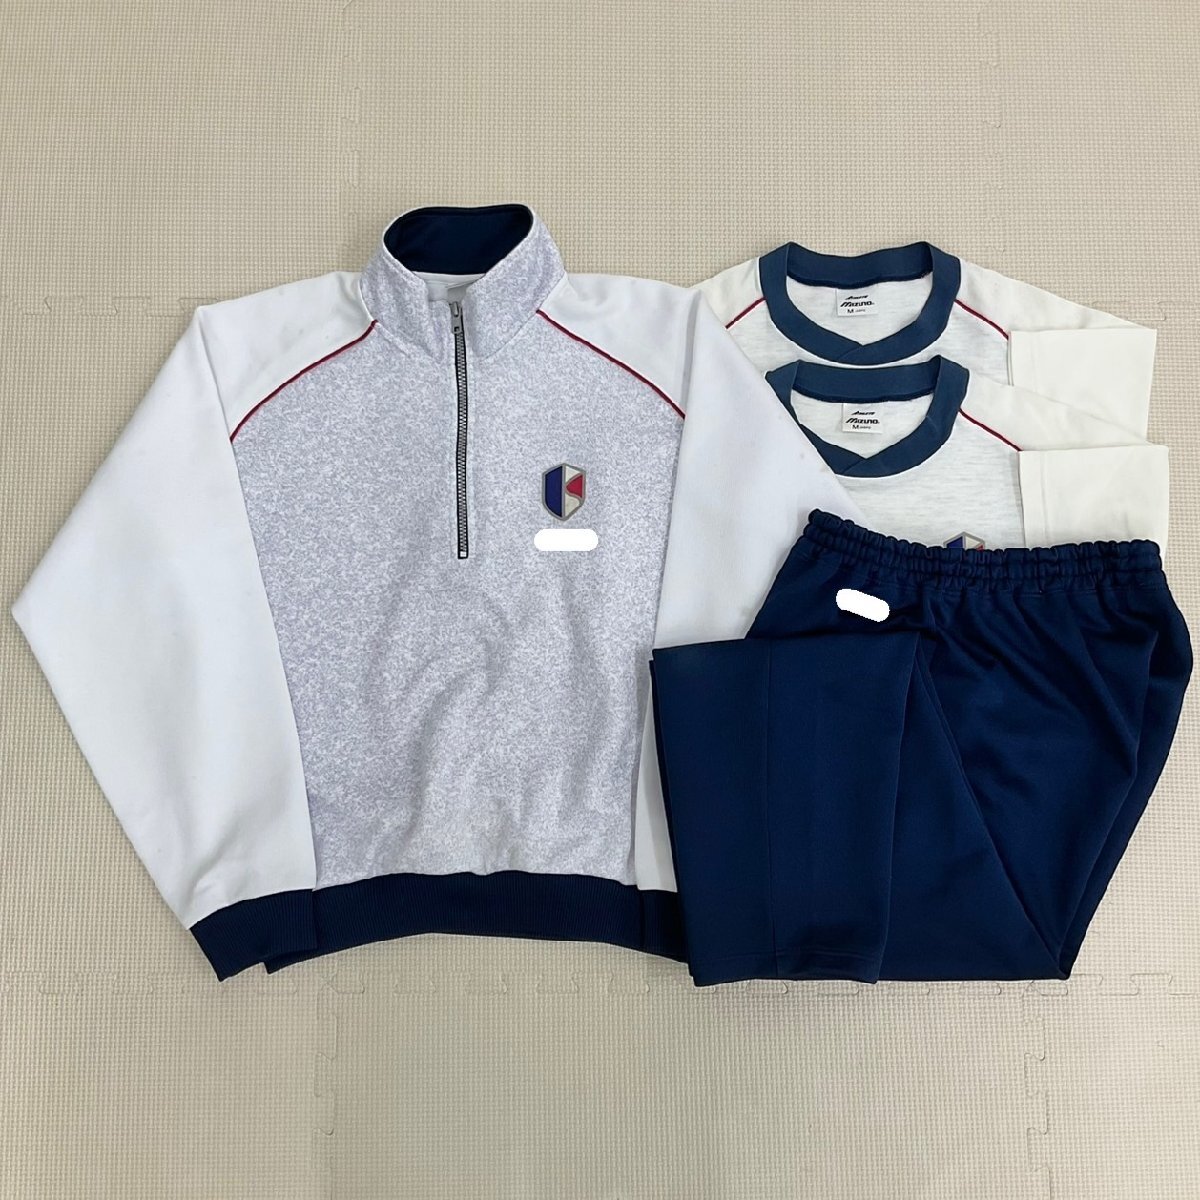 U688/S1145( used ) Hiroshima prefecture . day city high school gym uniform 4 point / old design /M JASPO/ long sleeve / short sleeves / long trousers /MIZUNO/. gray / white / navy blue / jersey / woman /. industry raw goods /